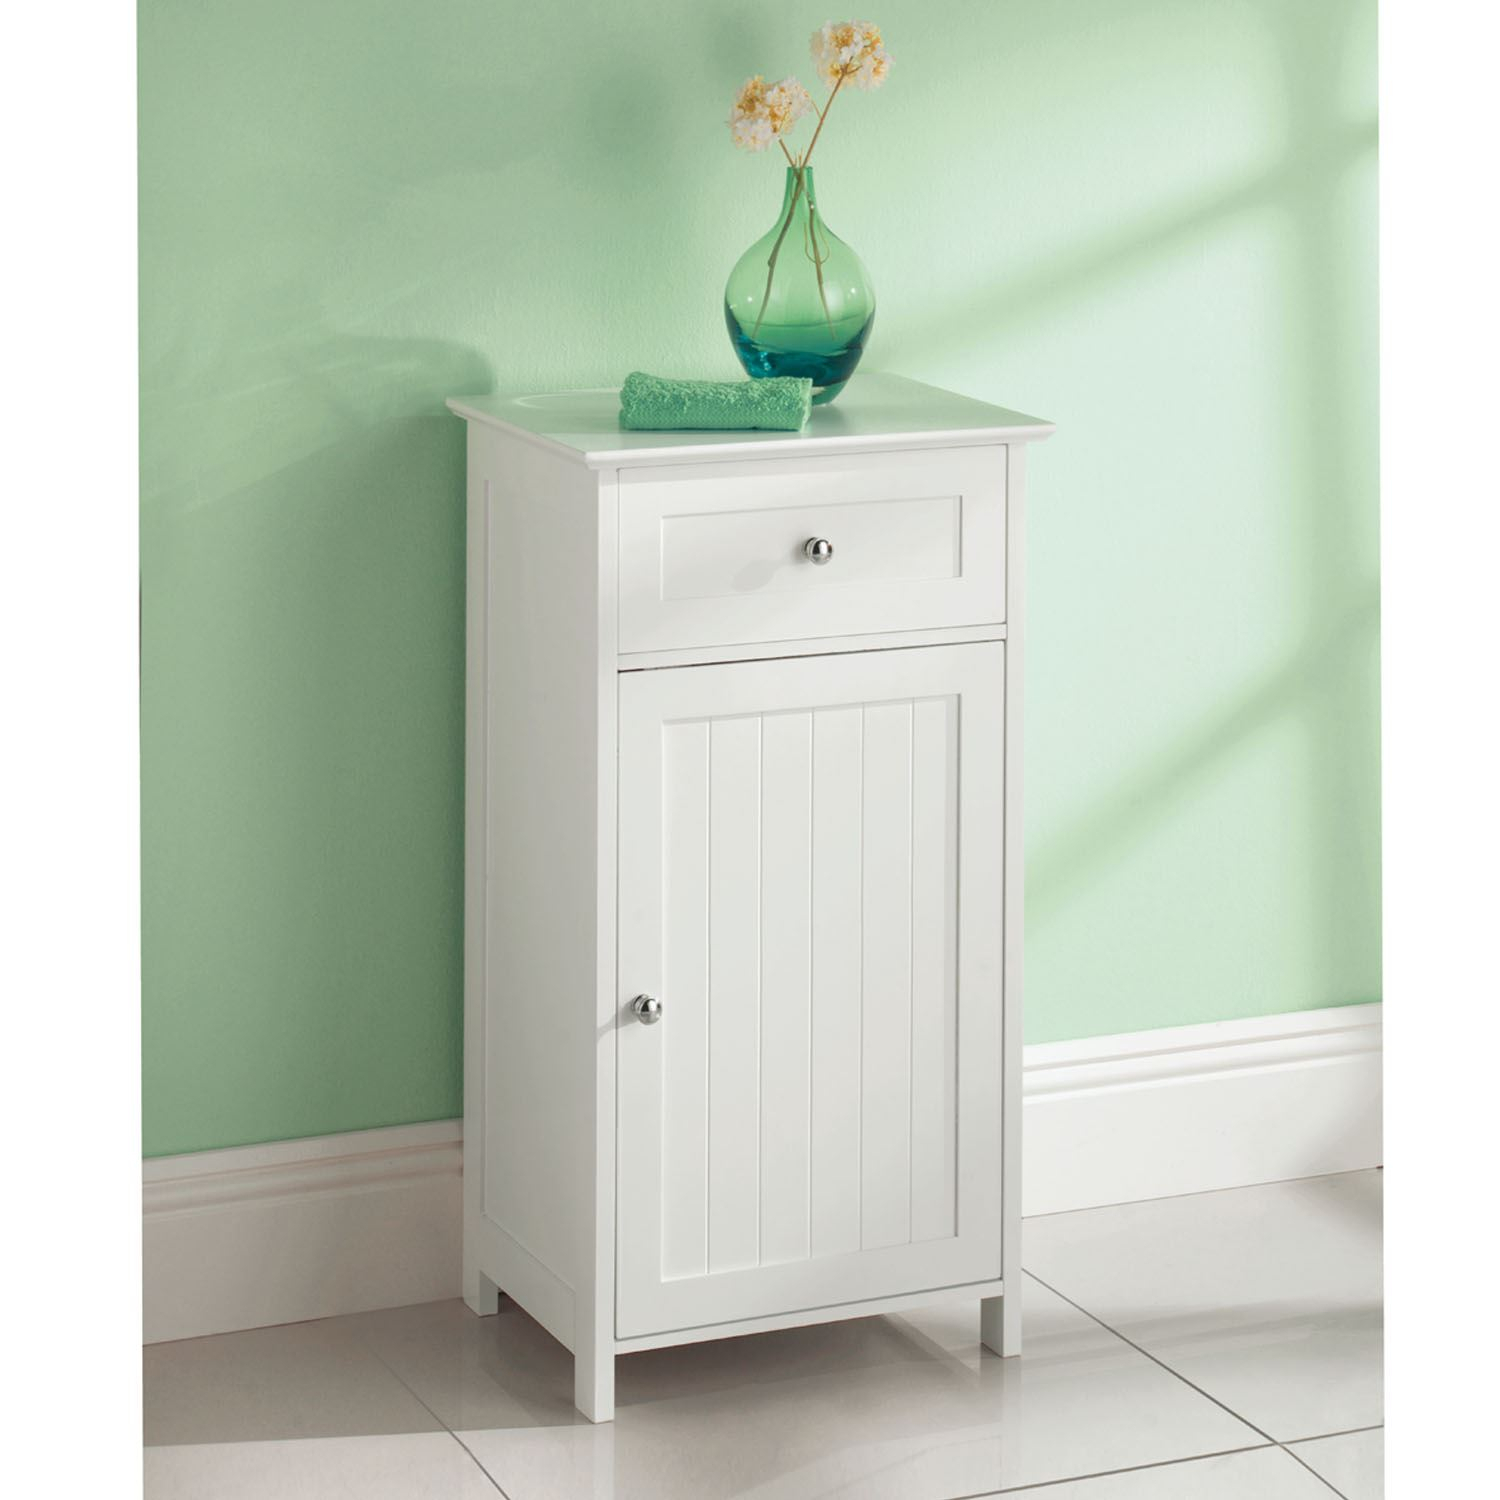 Freestanding Bathroom Cabinet White Cabinet Ideas pertaining to proportions 1500 X 1500